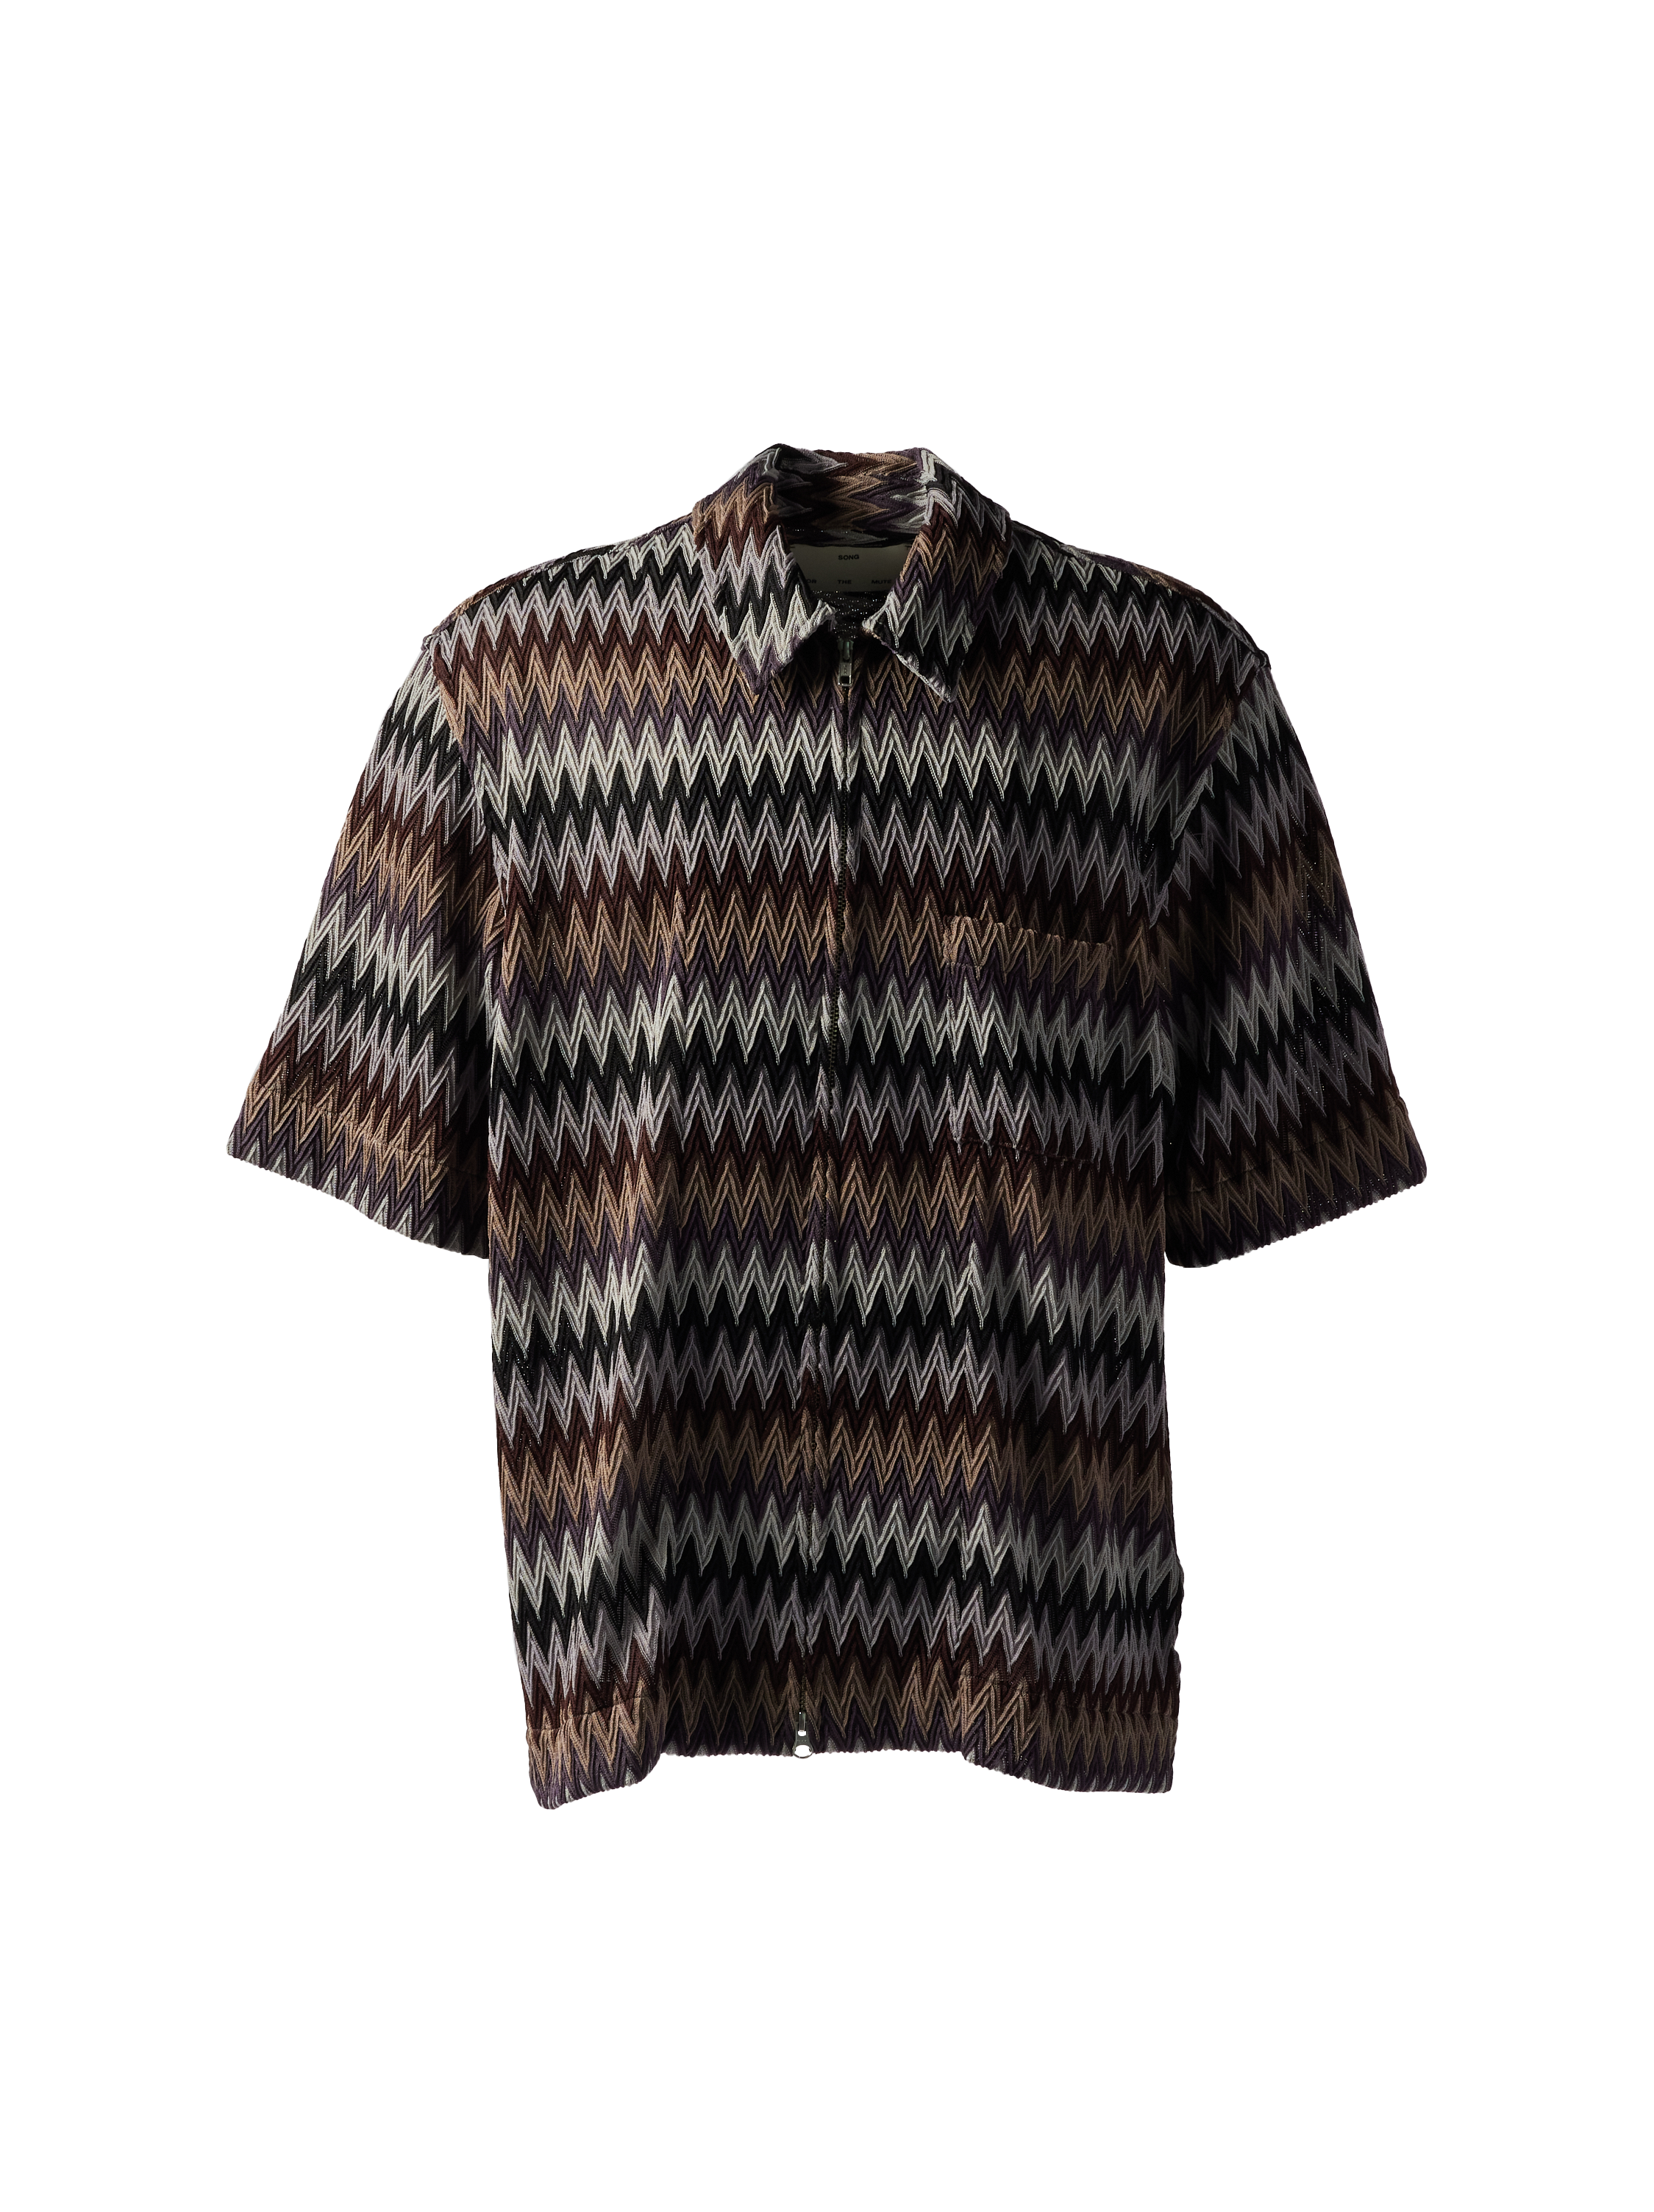 SONG FOR THE MUTE - Zig Zag Box Shirt product image